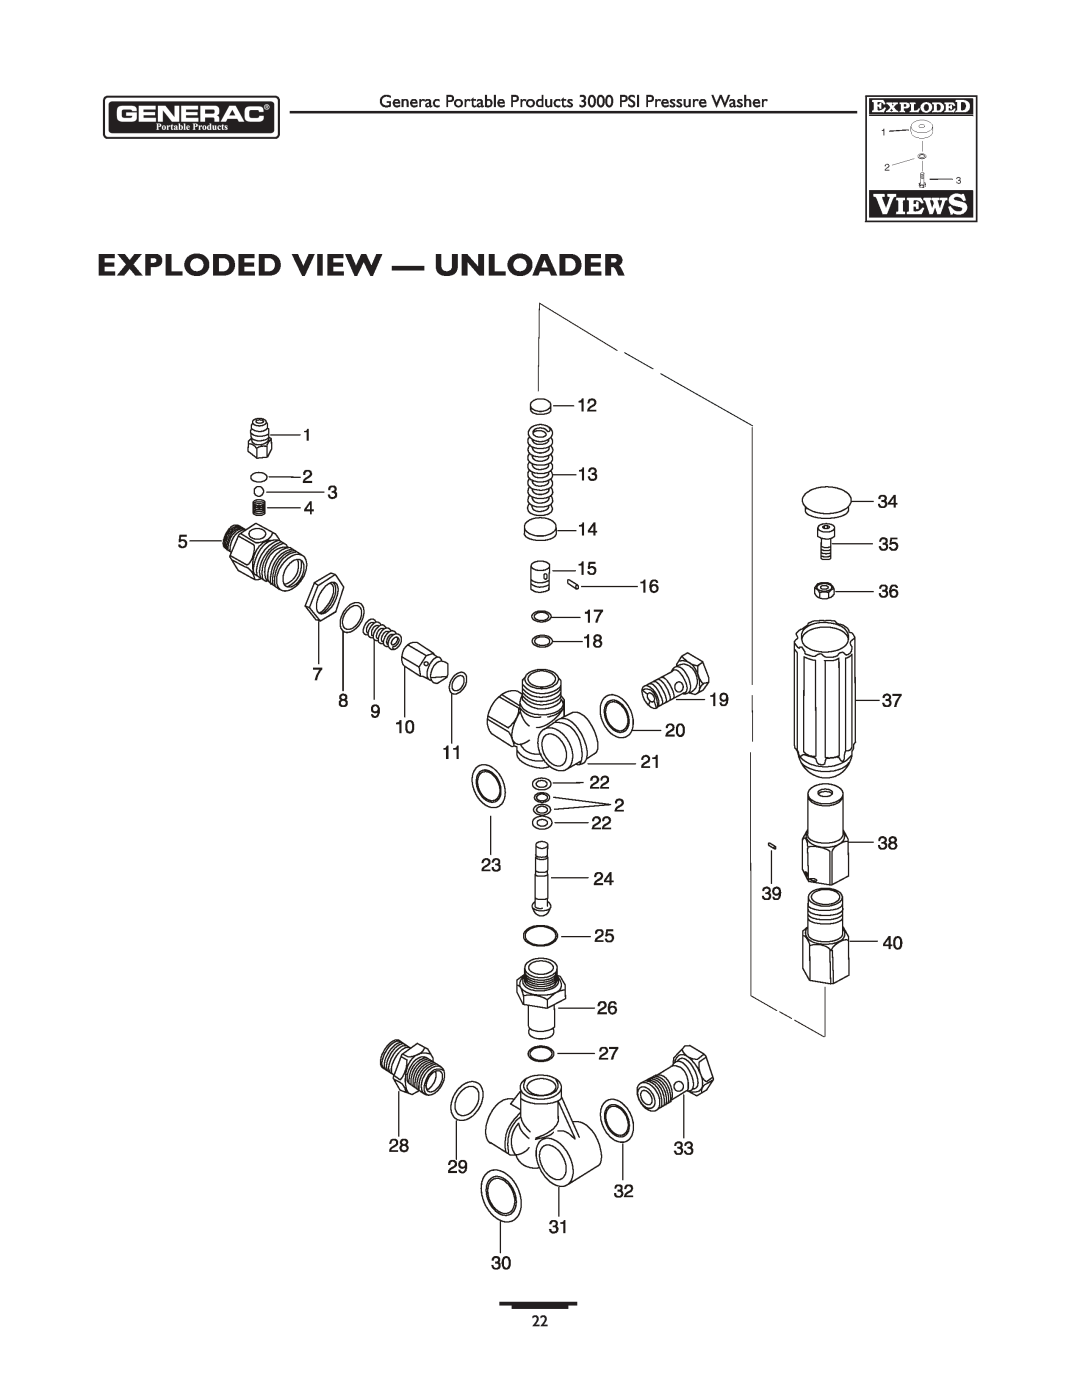 Briggs & Stratton 1418-2 owner manual Exploded View - Unloader, Generac Portable Products 3000 PSI Pressure Washer 